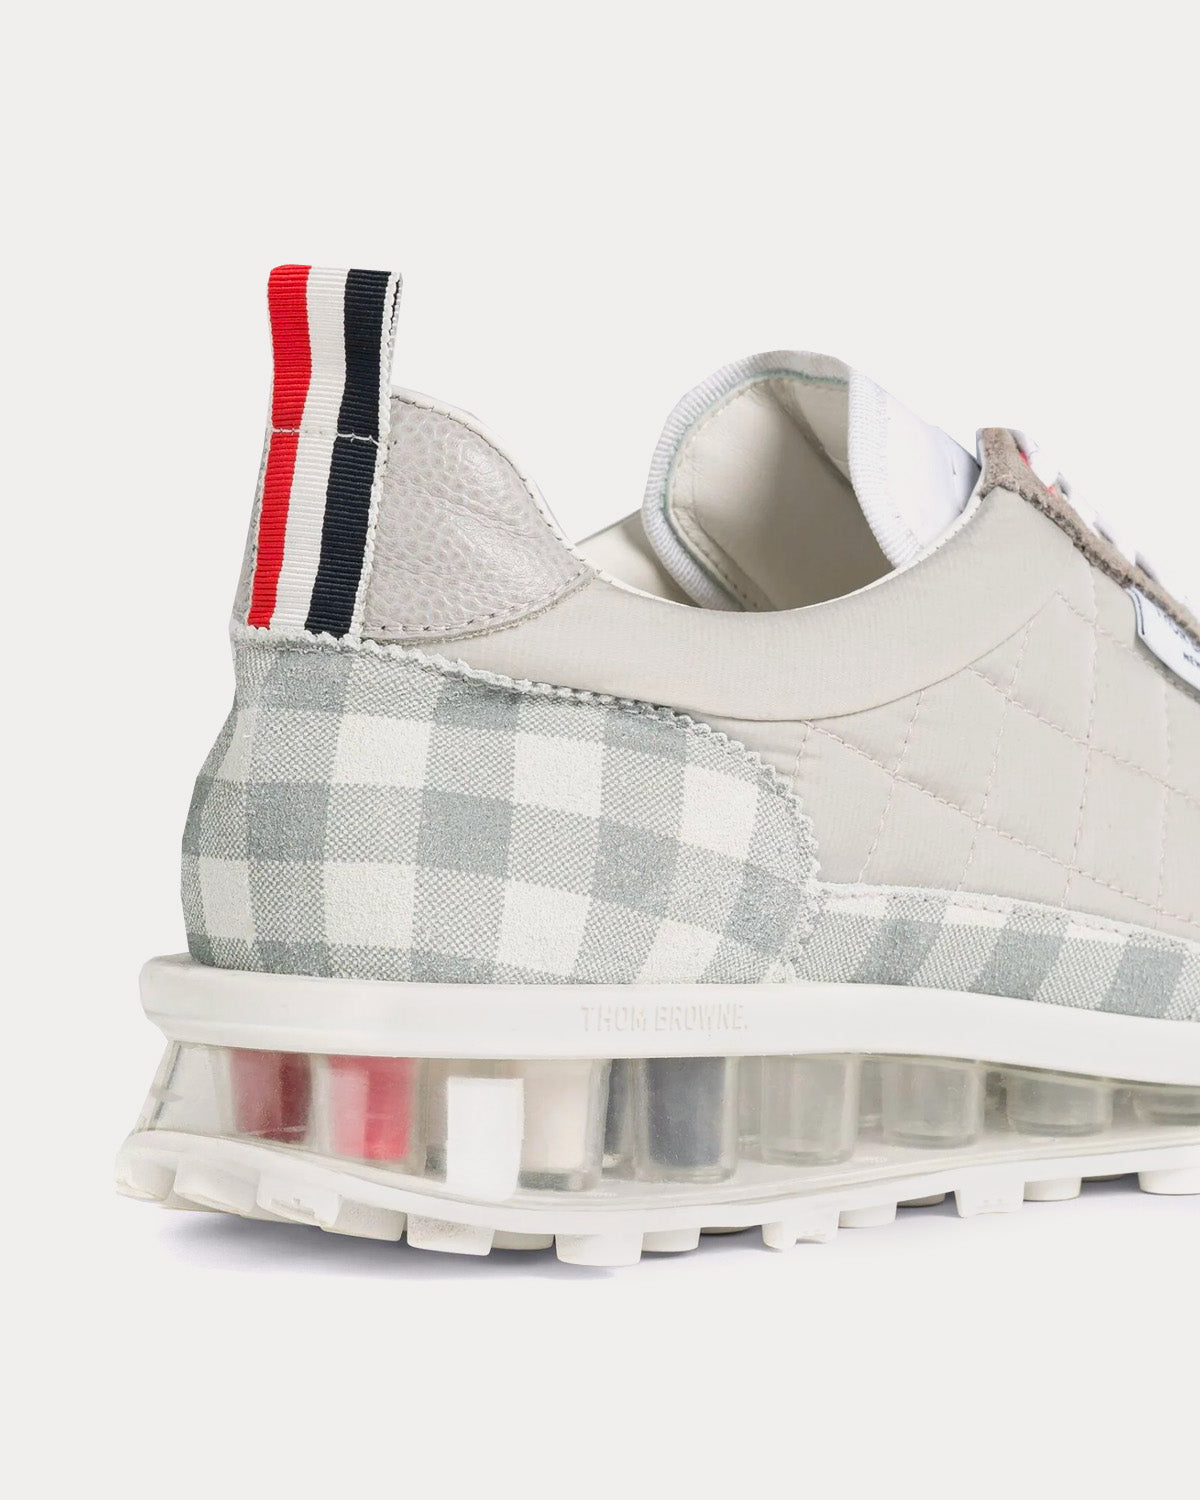 Thom Browne - Tech Runner Quilted Gingham Print Grey Low Top Sneakers